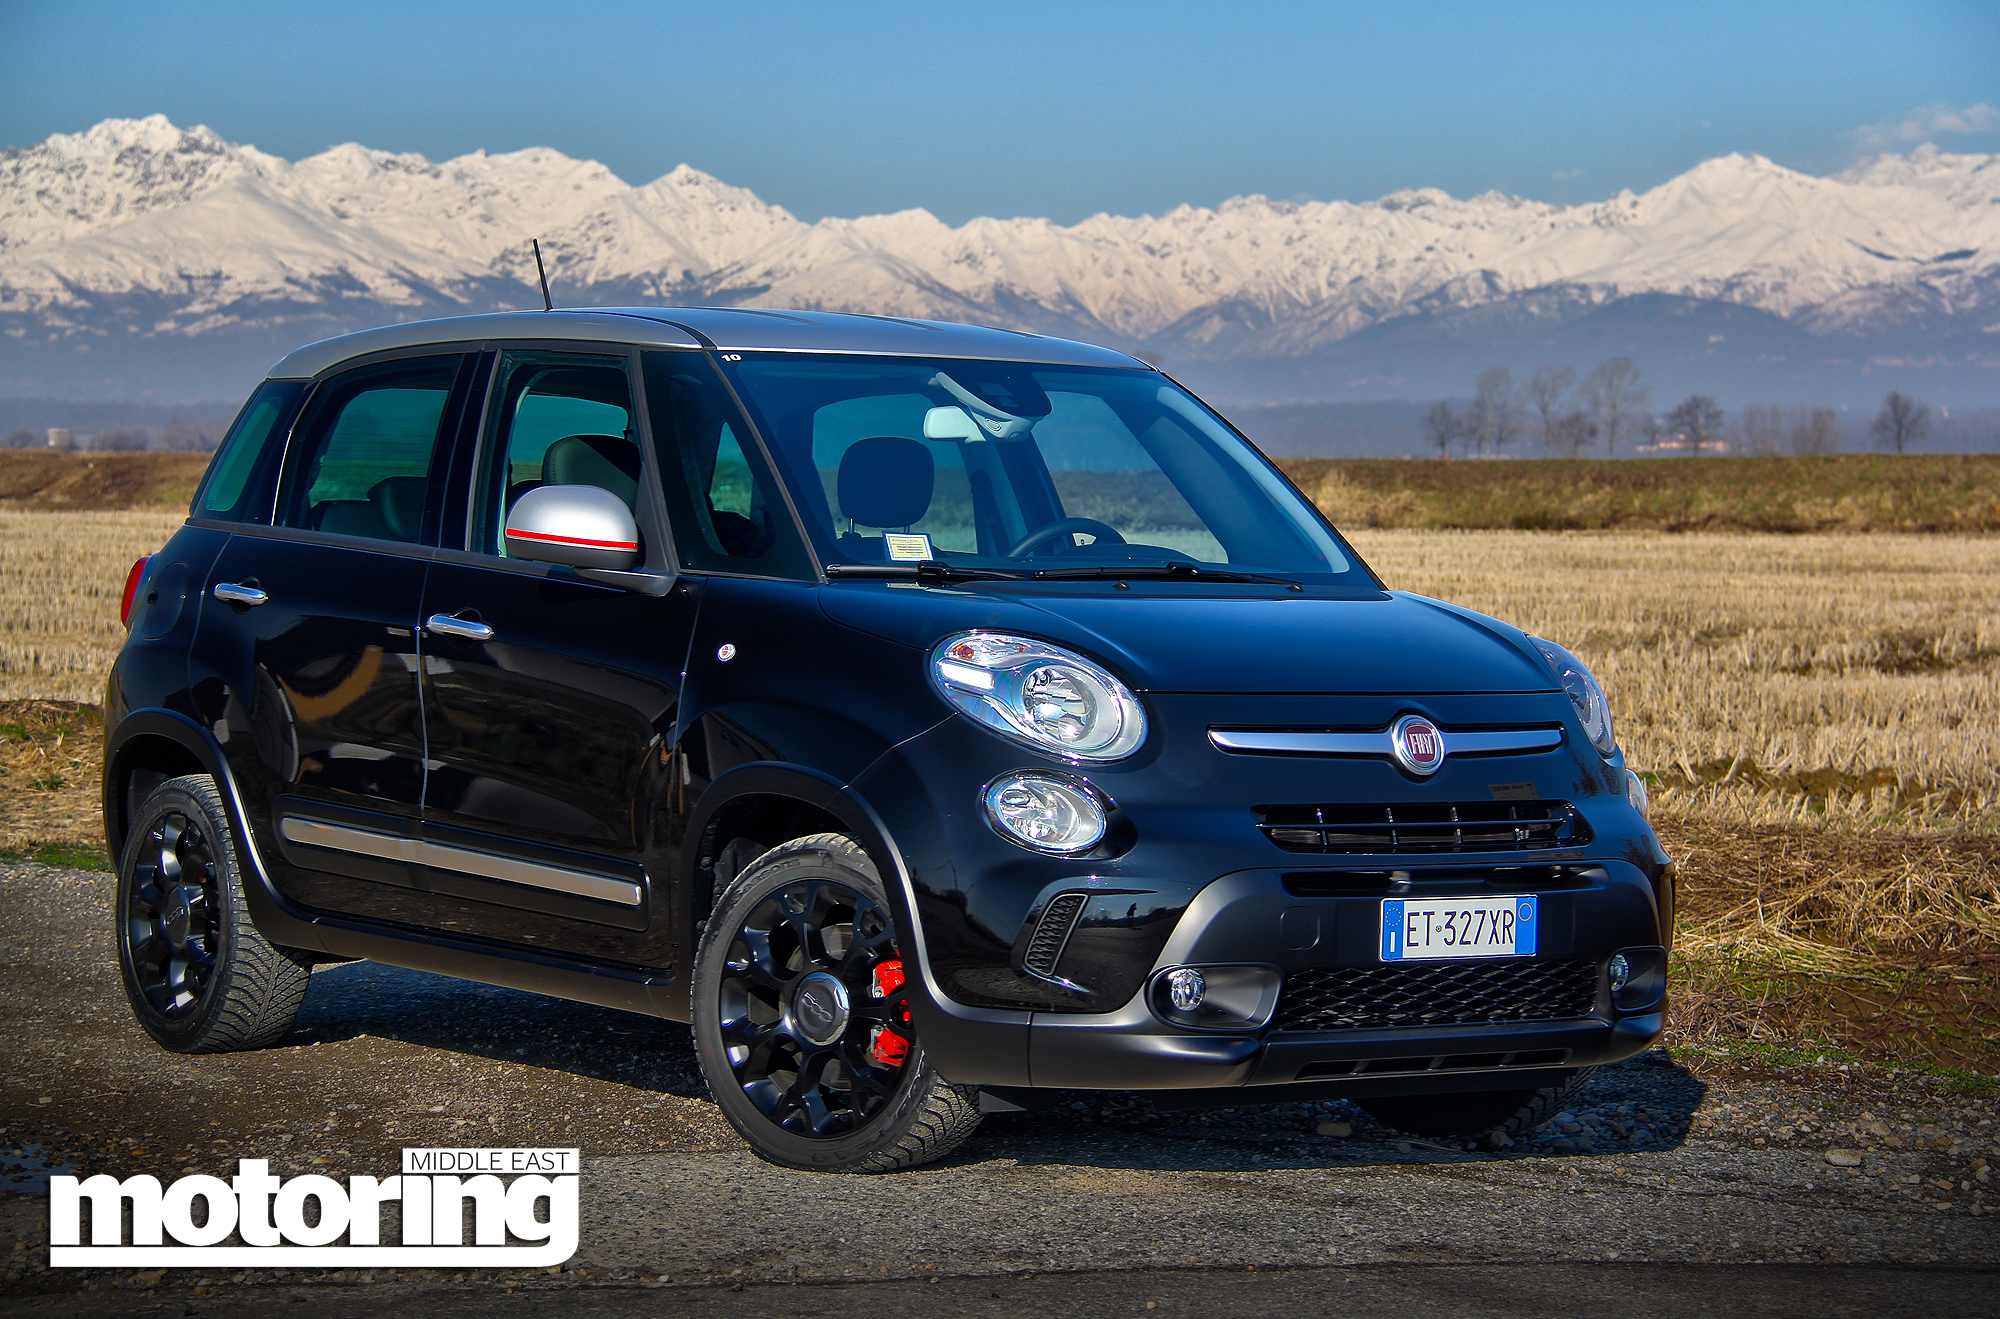 2014 Fiat 500L Trekking, Middle East launch, spec and